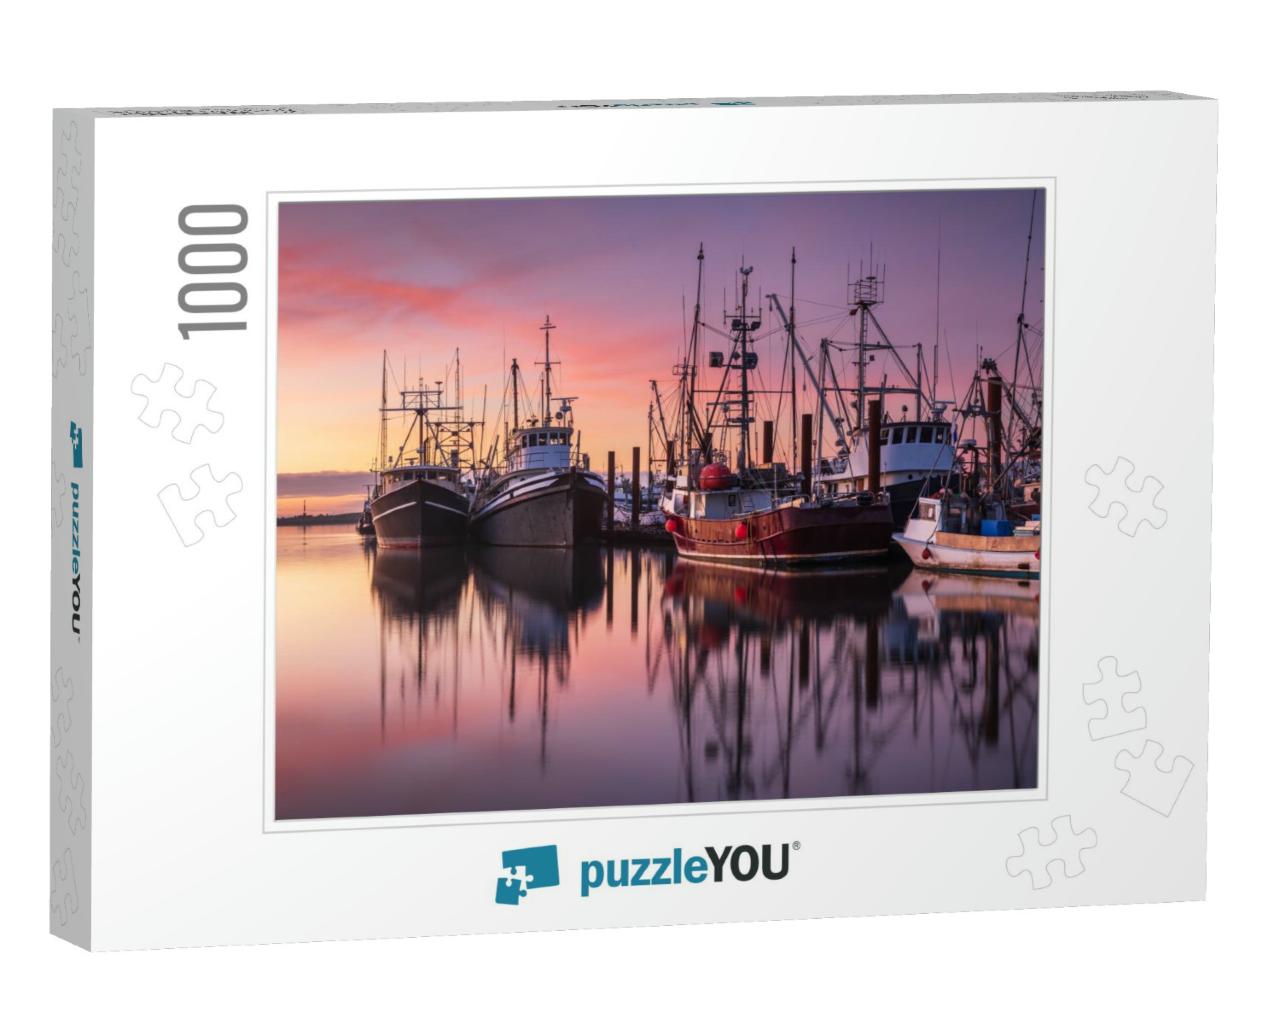 Fishing Boats in Steveston Harbor At Dusk, Richmond, Brit... Jigsaw Puzzle with 1000 pieces